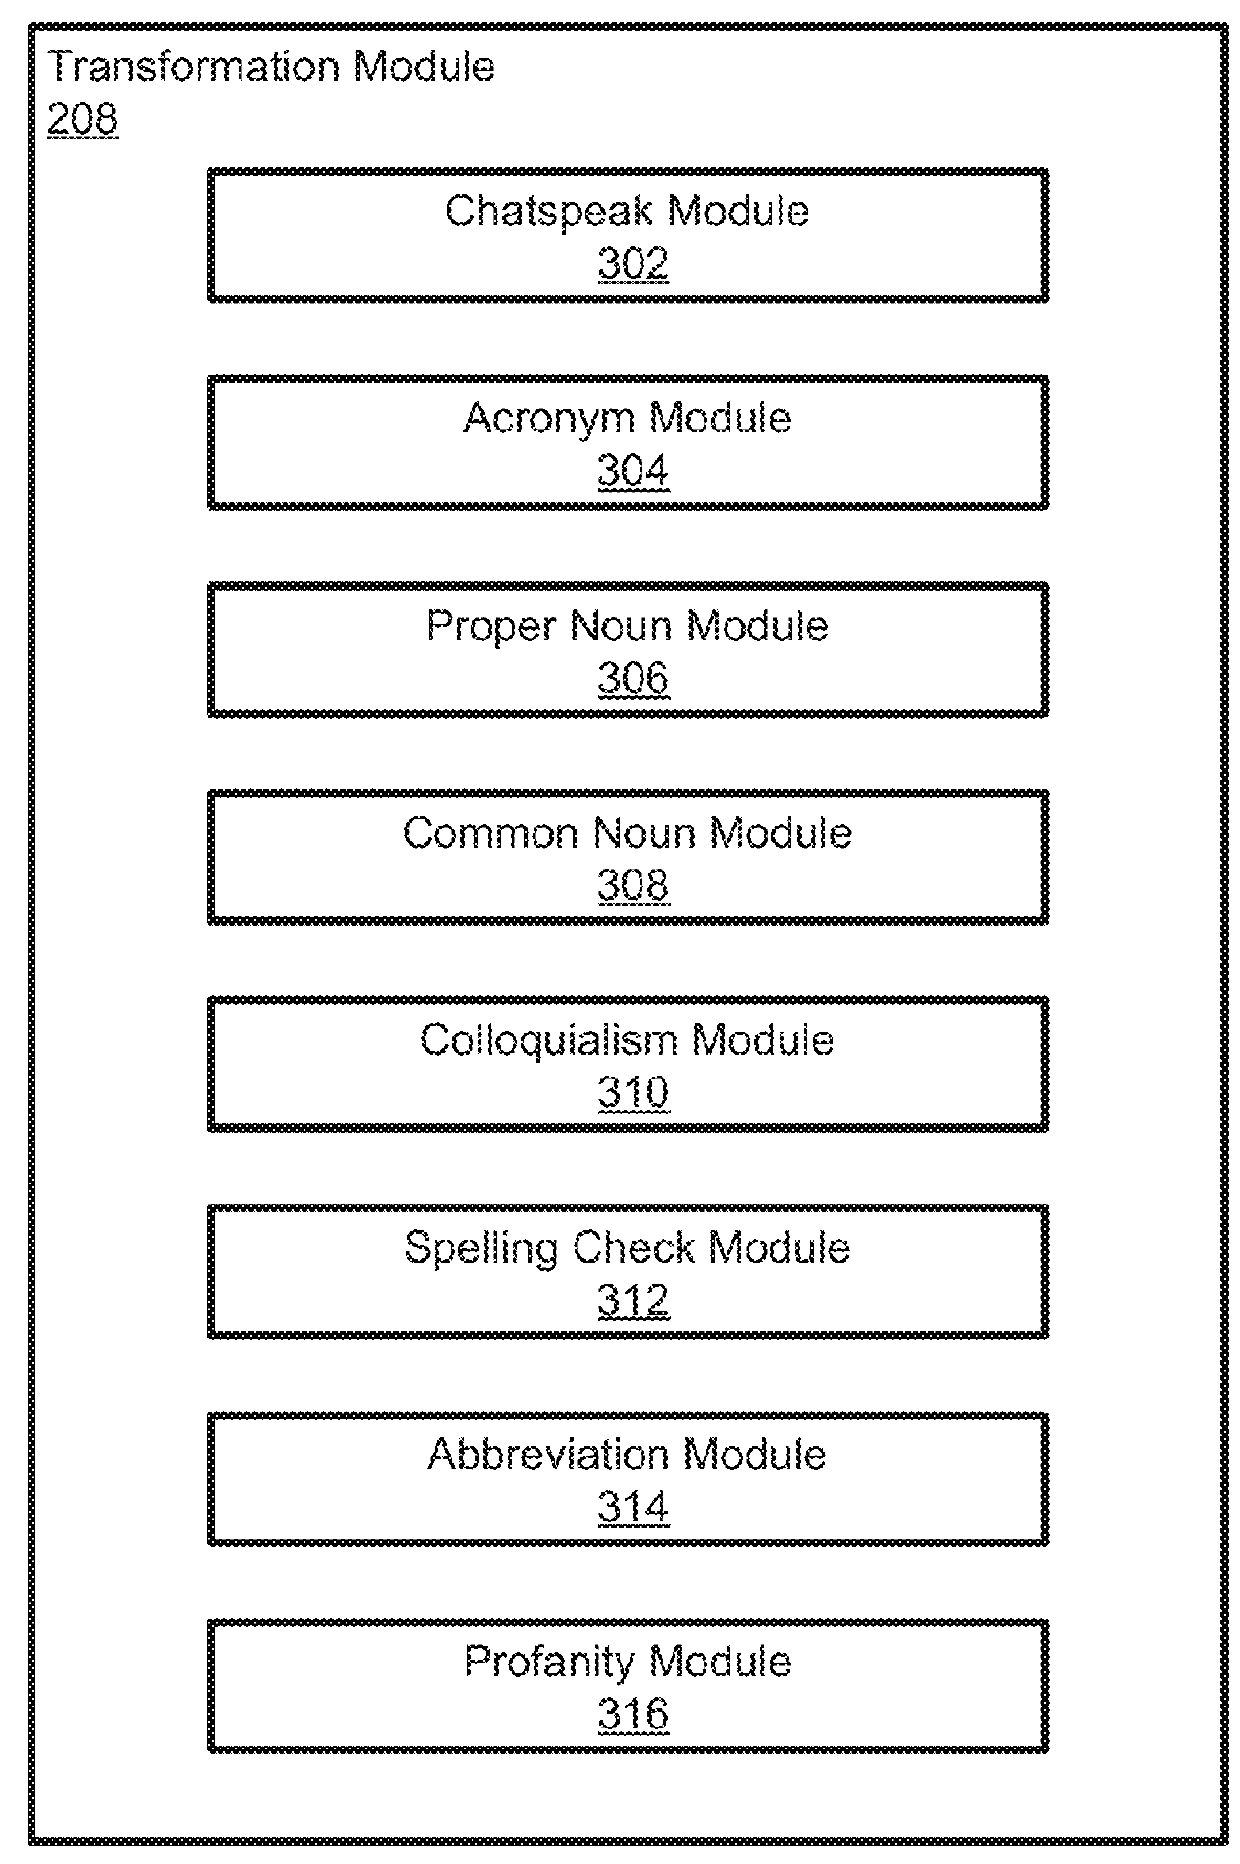 Systems and methods for multi-user multi-lingual communications